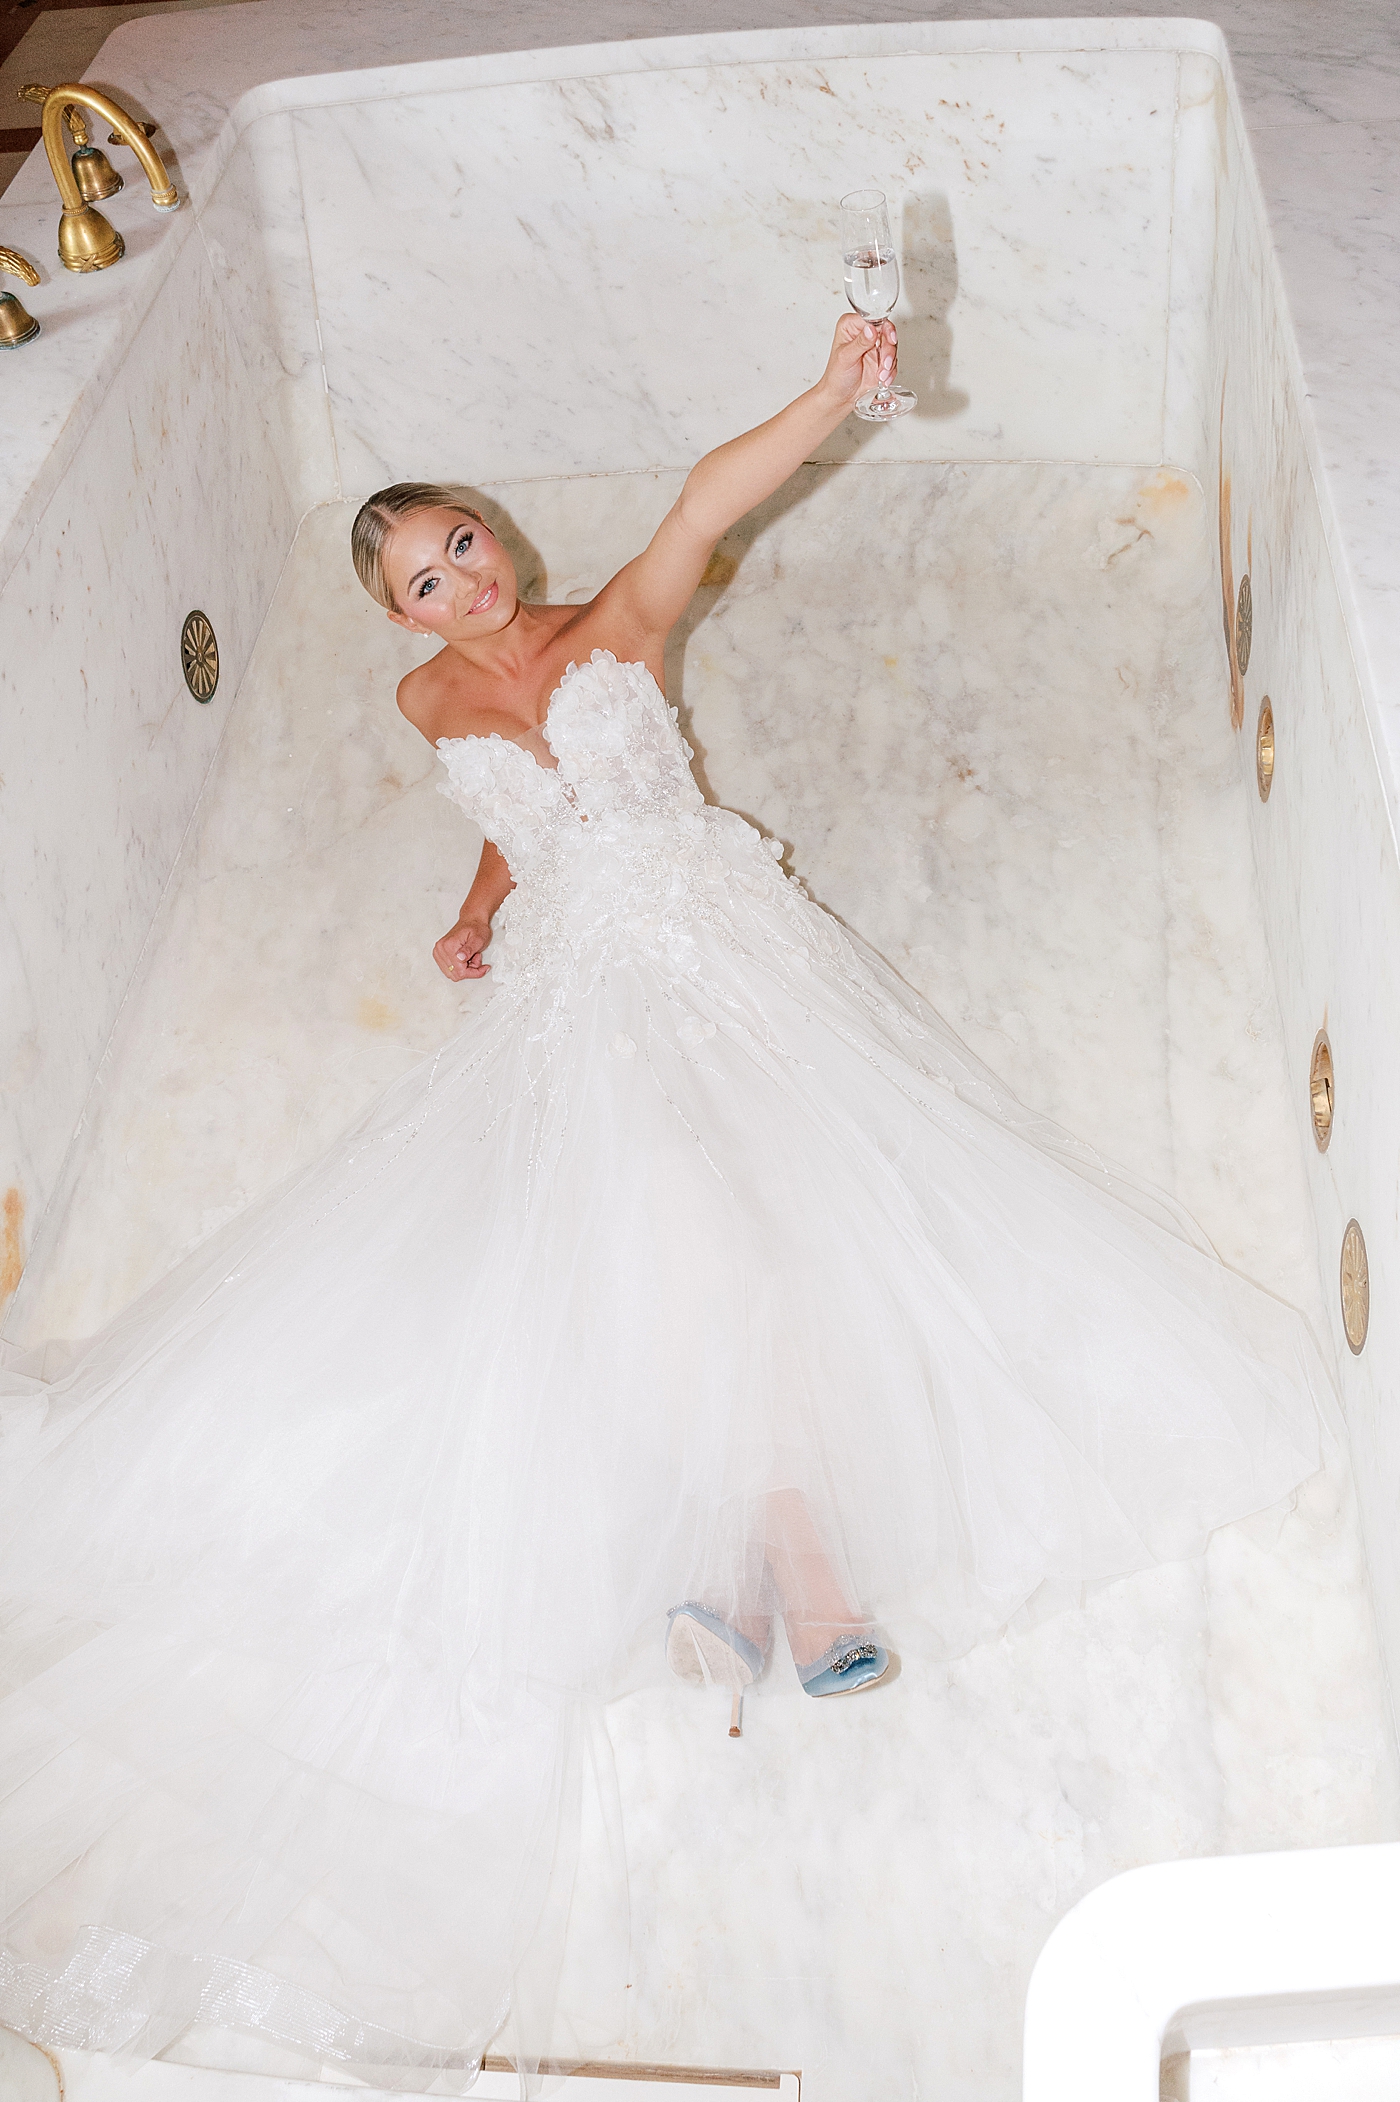 Bridal portraits in a bathtub | Image by Hope Helmuth Photography